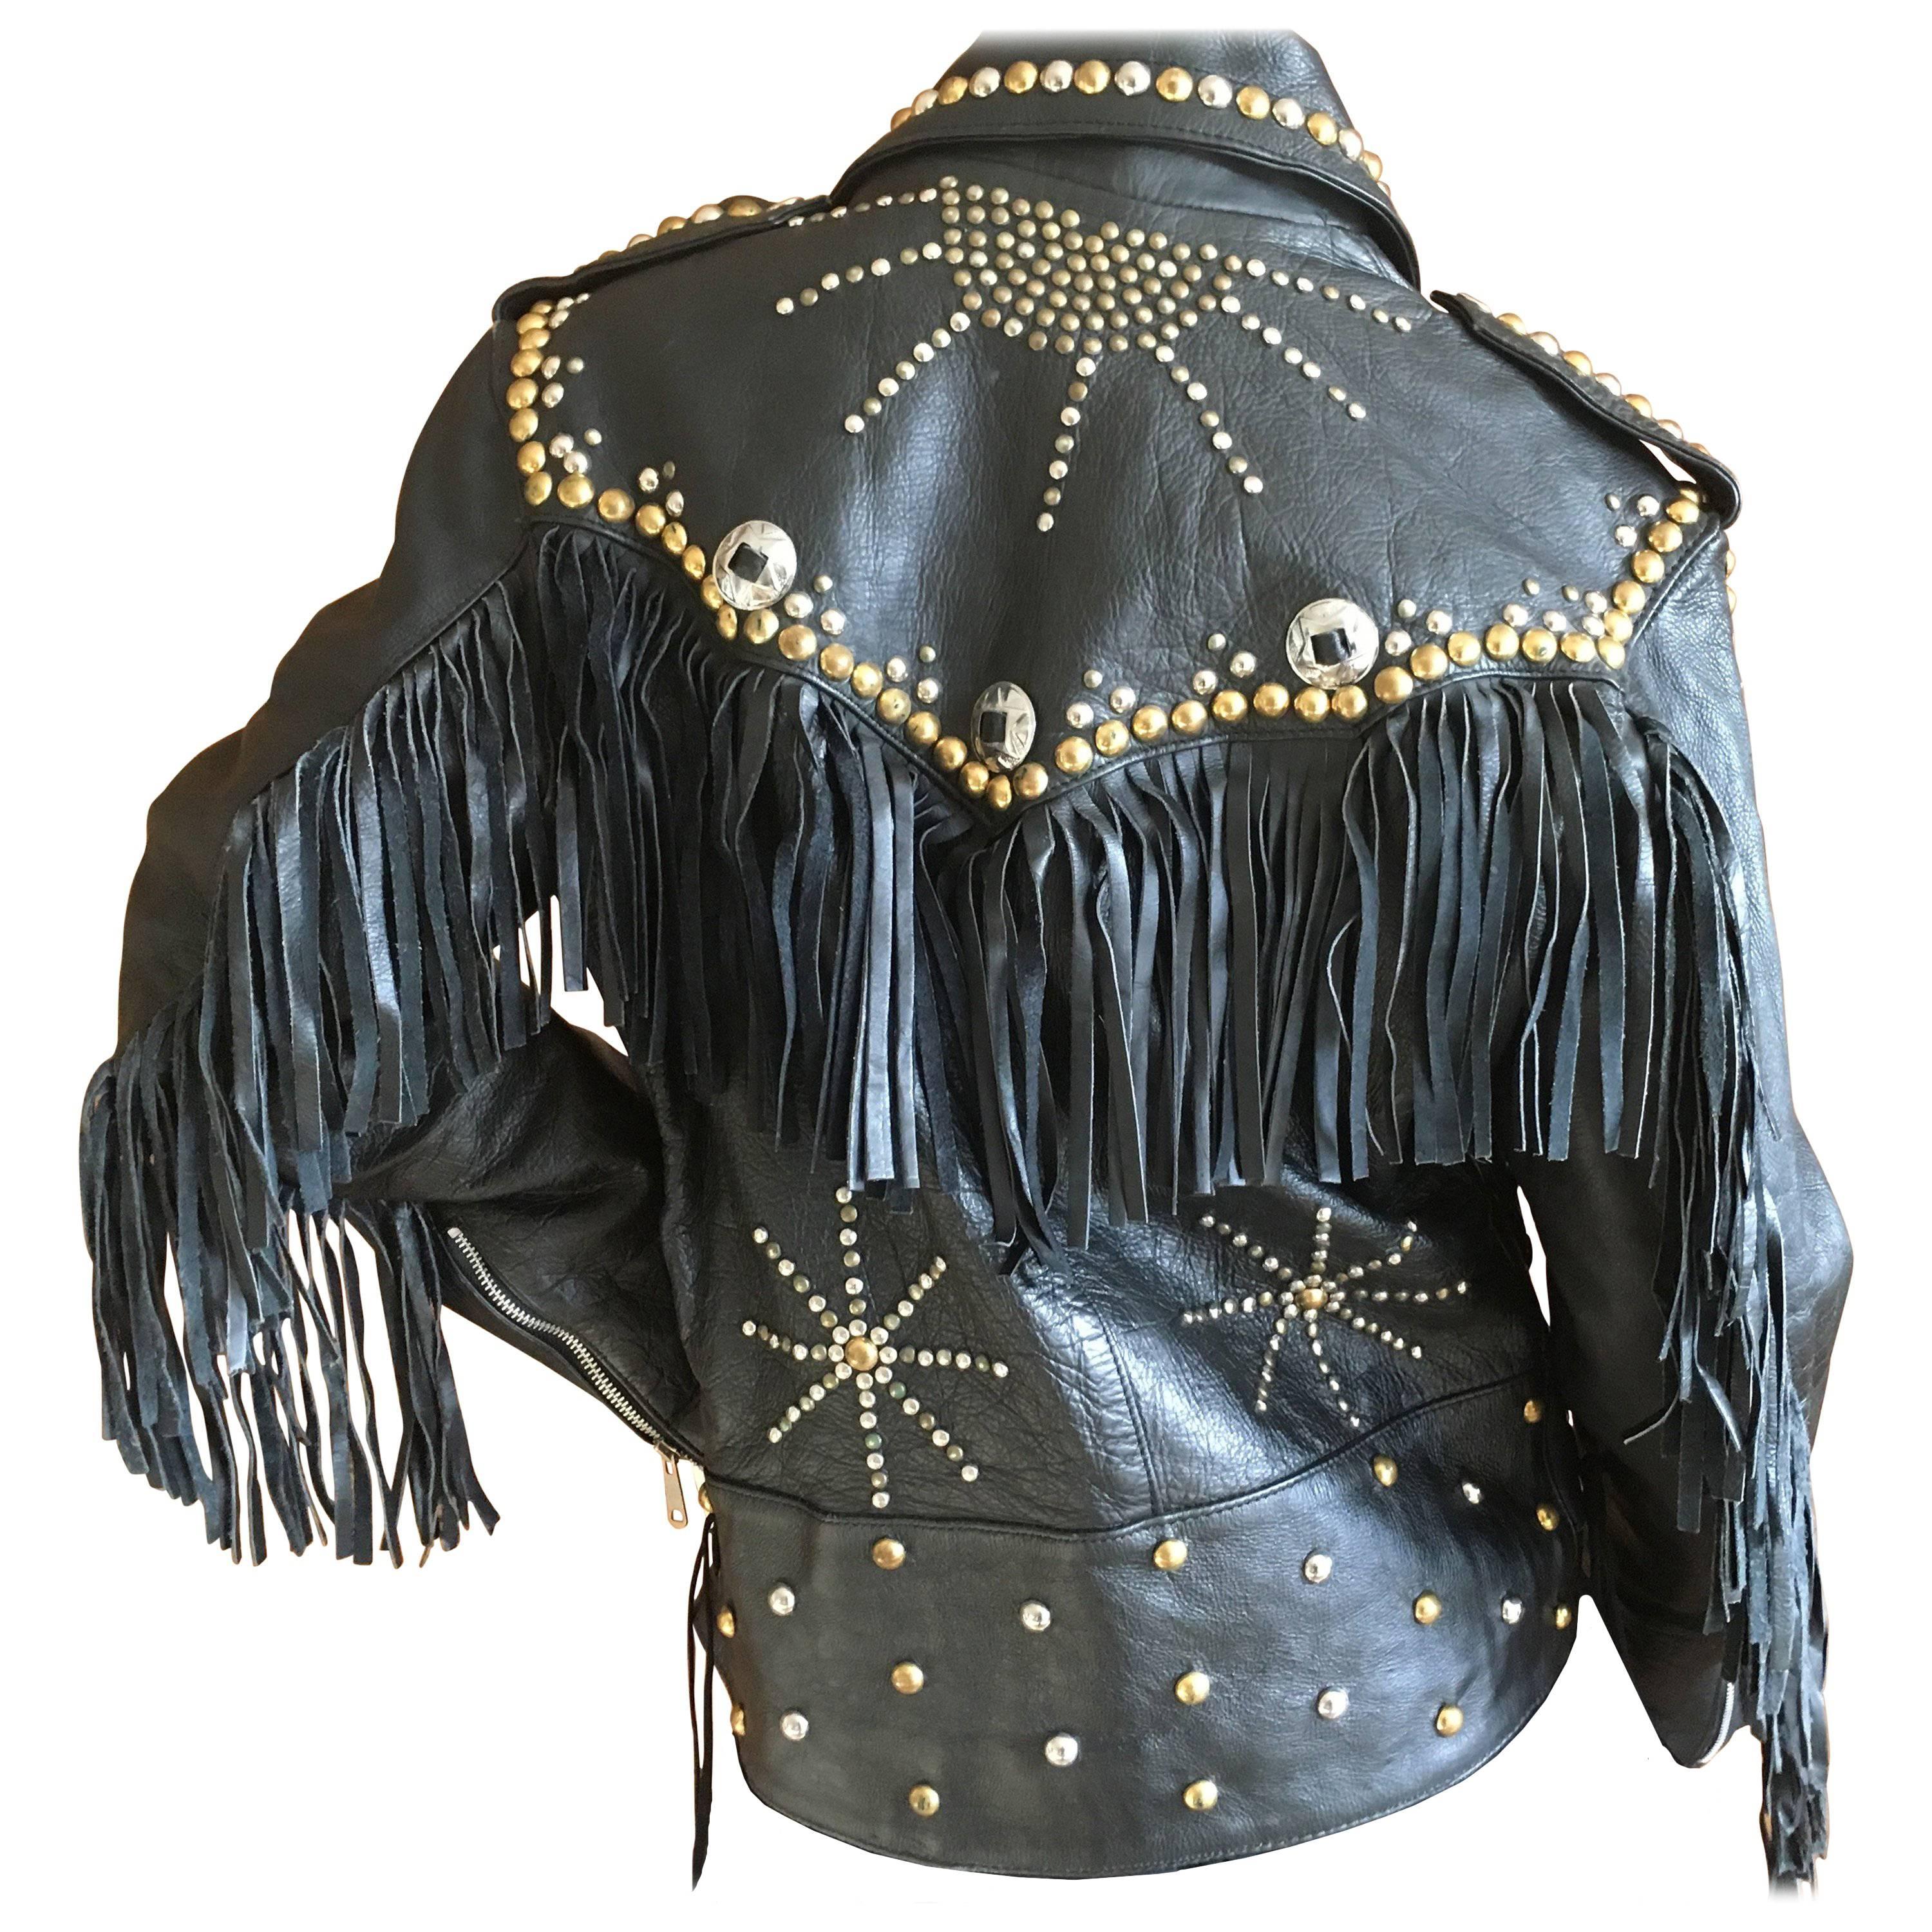 Vintage Men's Leather Motorcycle Jacket with Fringe and Studs